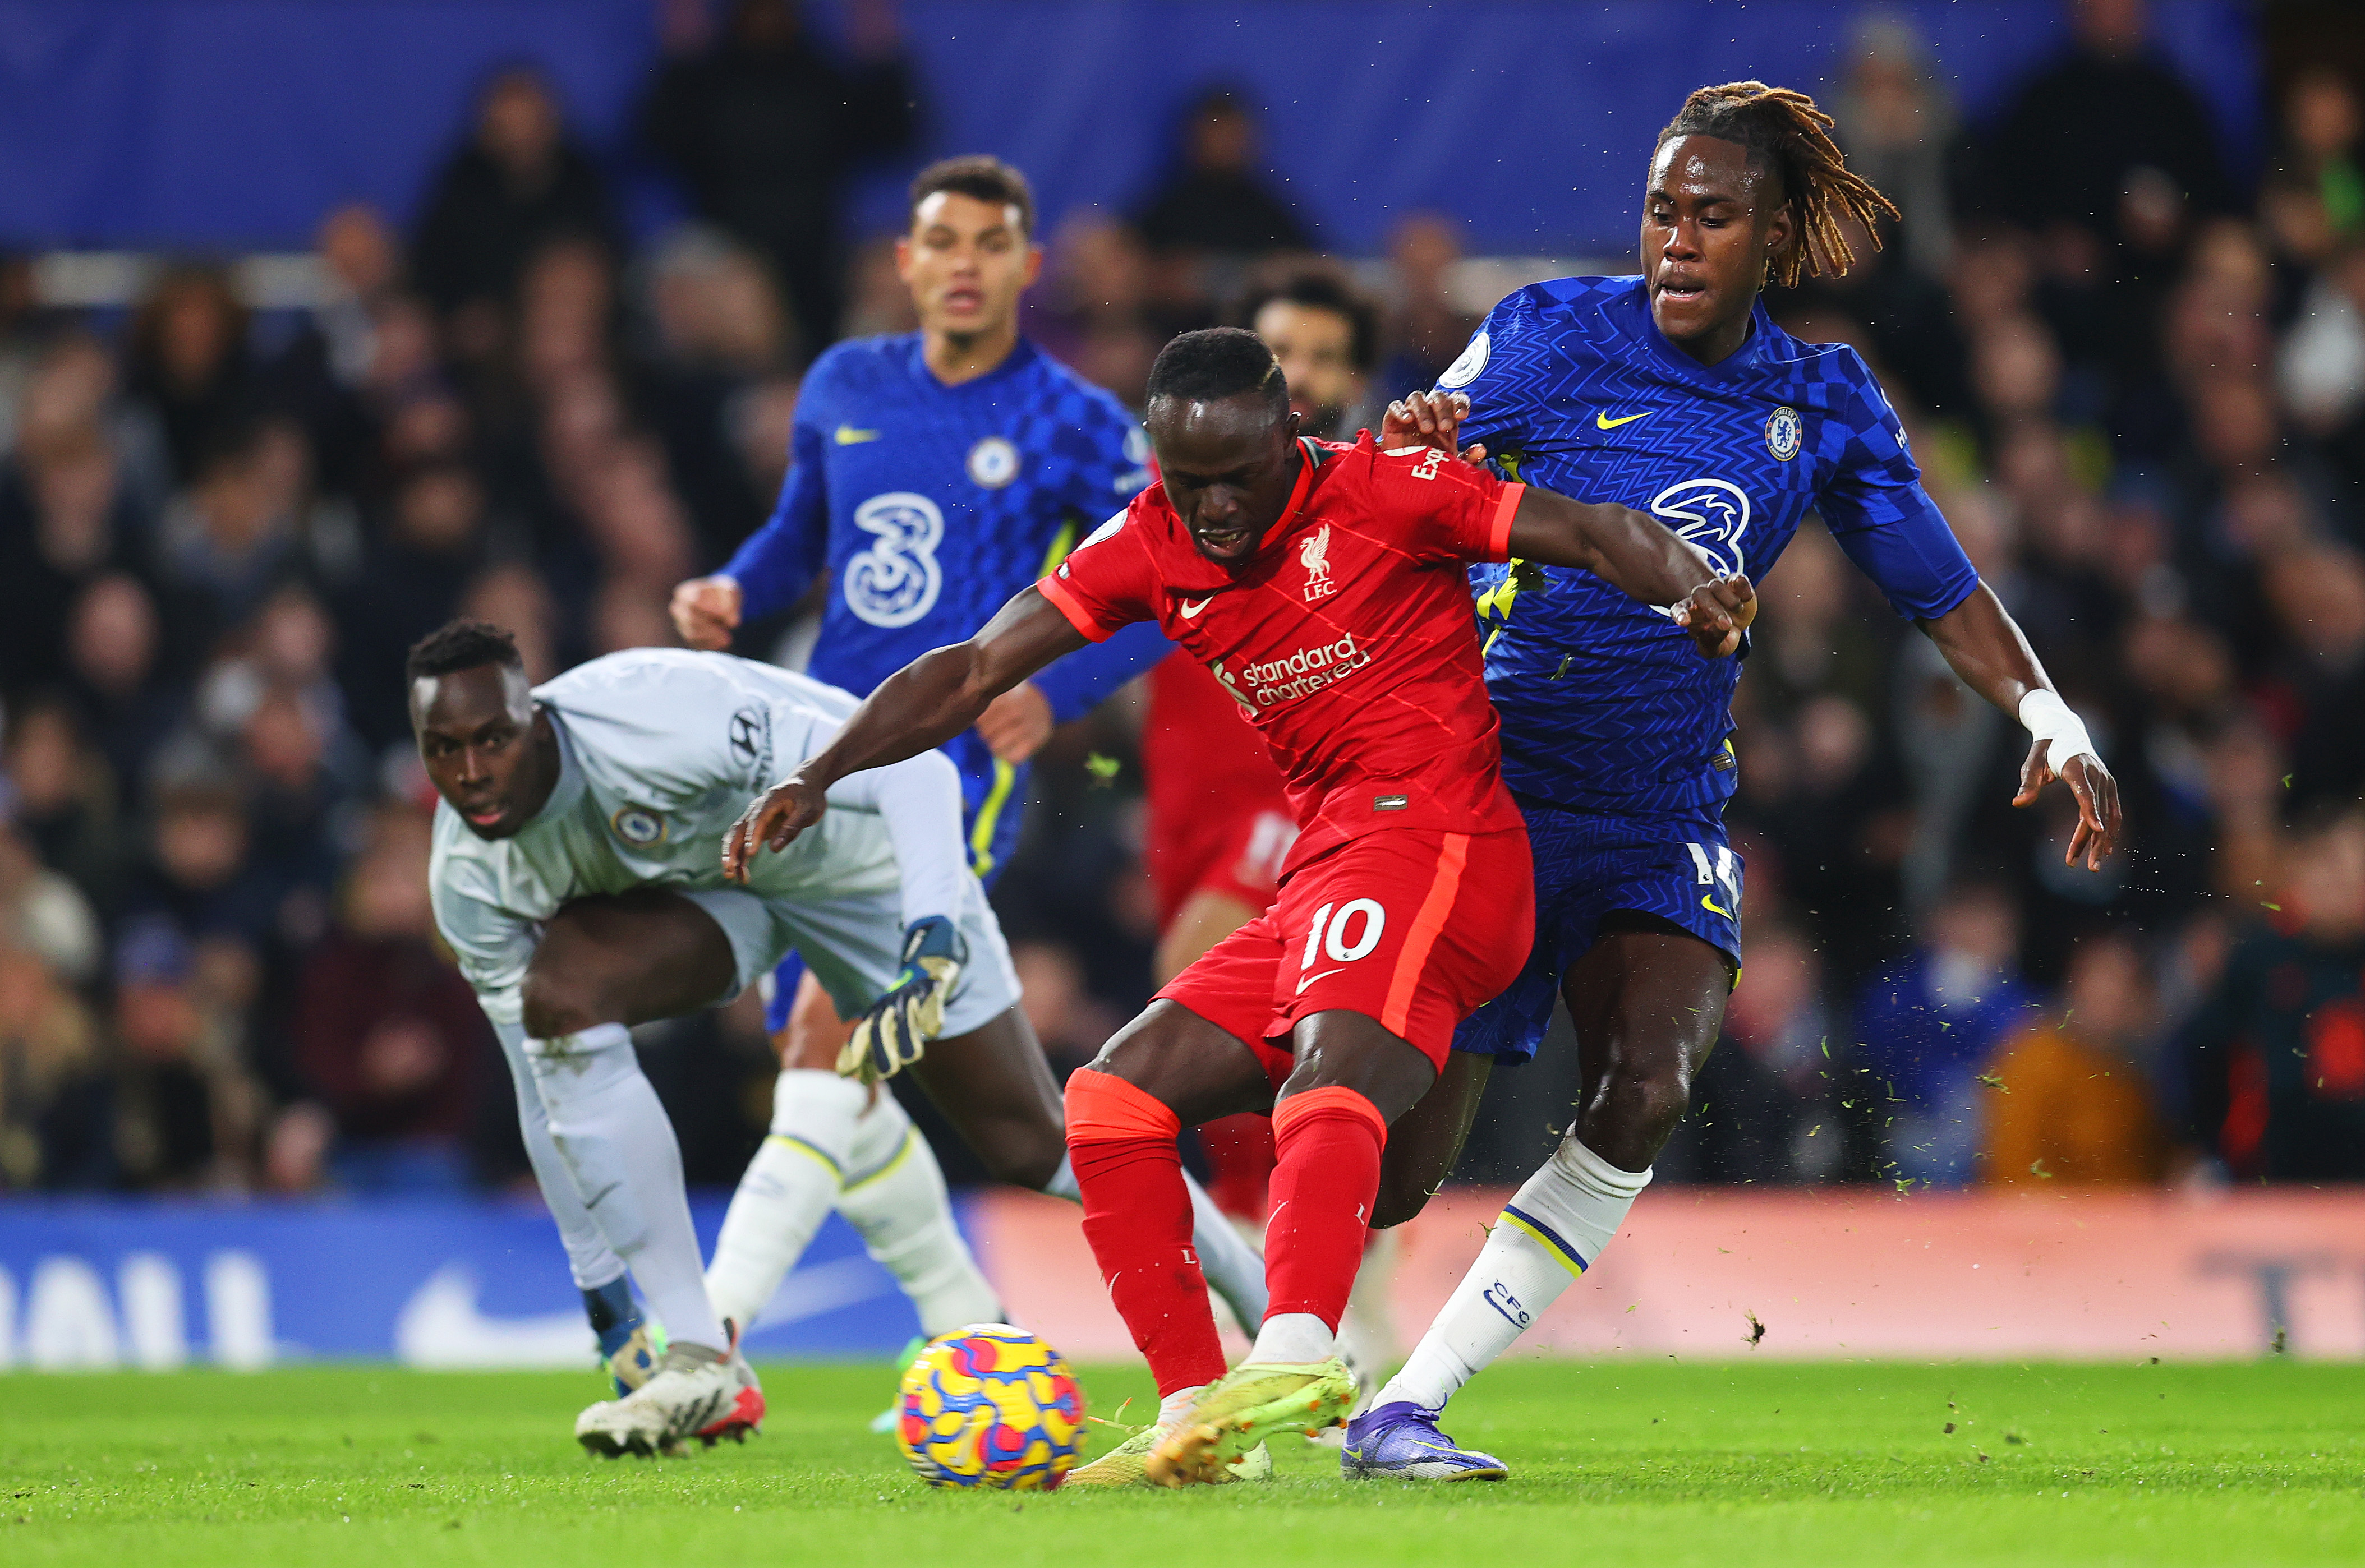 Sadio Mane of Liverpool scores their sides first goal past Edouard Mendy of Chelsea during the Premier League match between Chelsea and Liverpool at Stamford Bridge on January 02, 2022 in London, England.